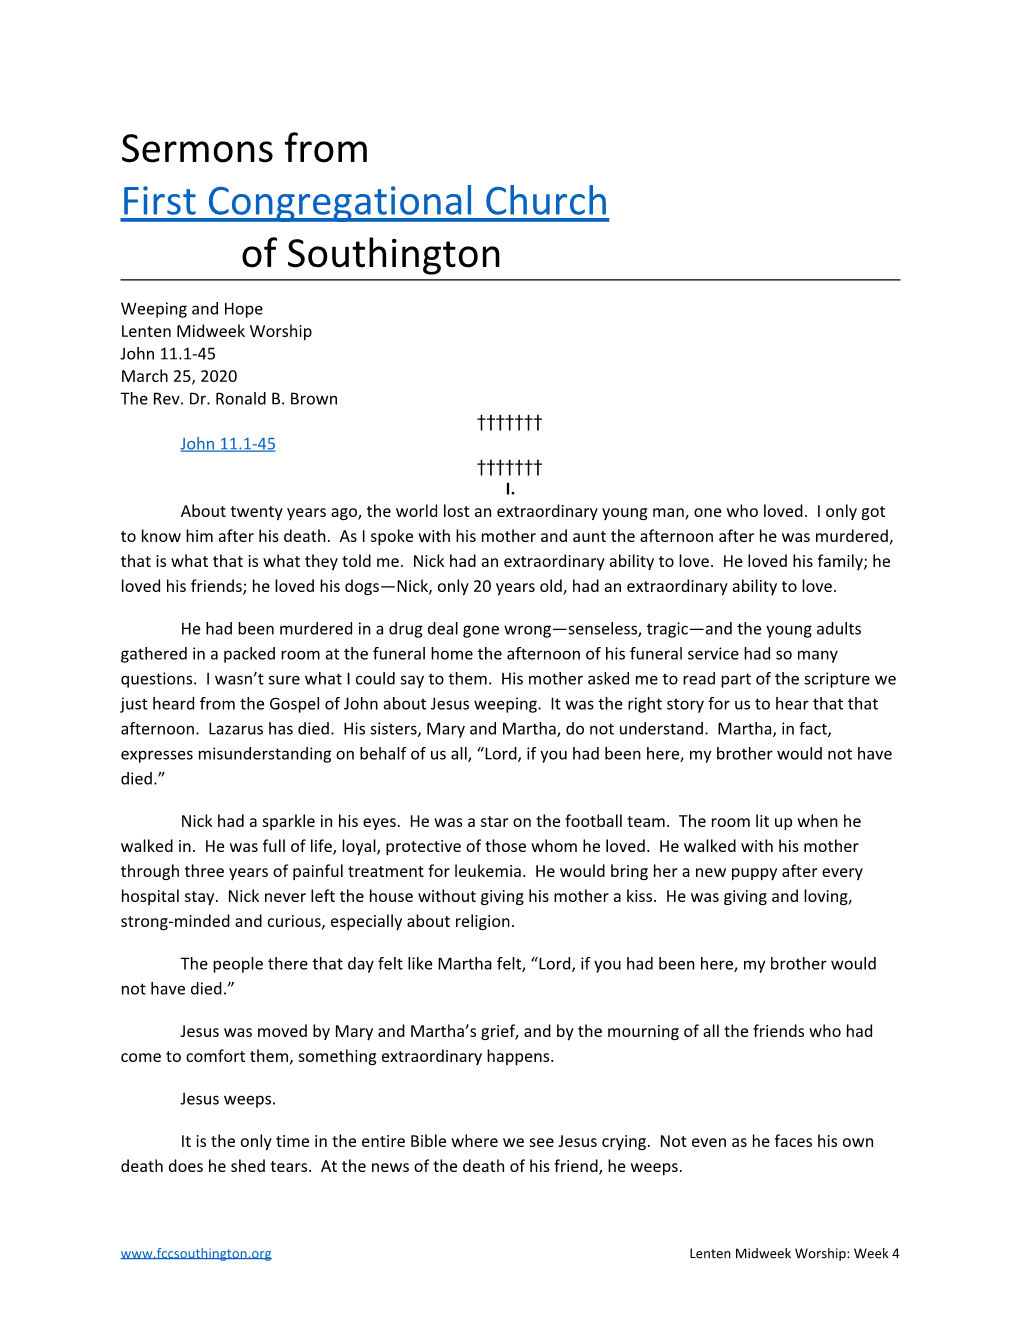 Sermons from First Congregational Church of Southington